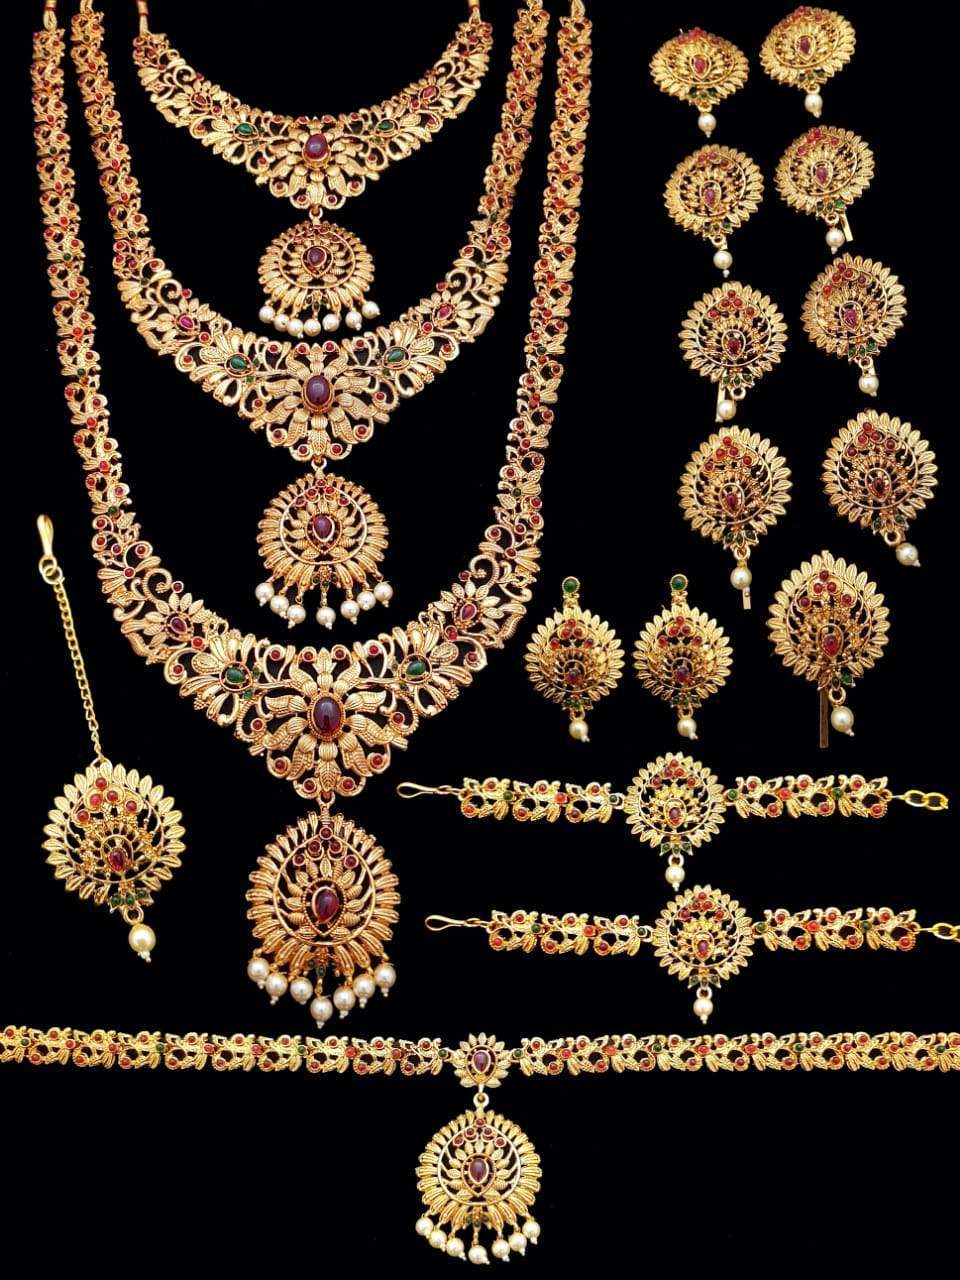 Bahubali Design Antique Gold Finish Full Bridal Set Combo FREE Express Delivery NSN02-1450-2388N